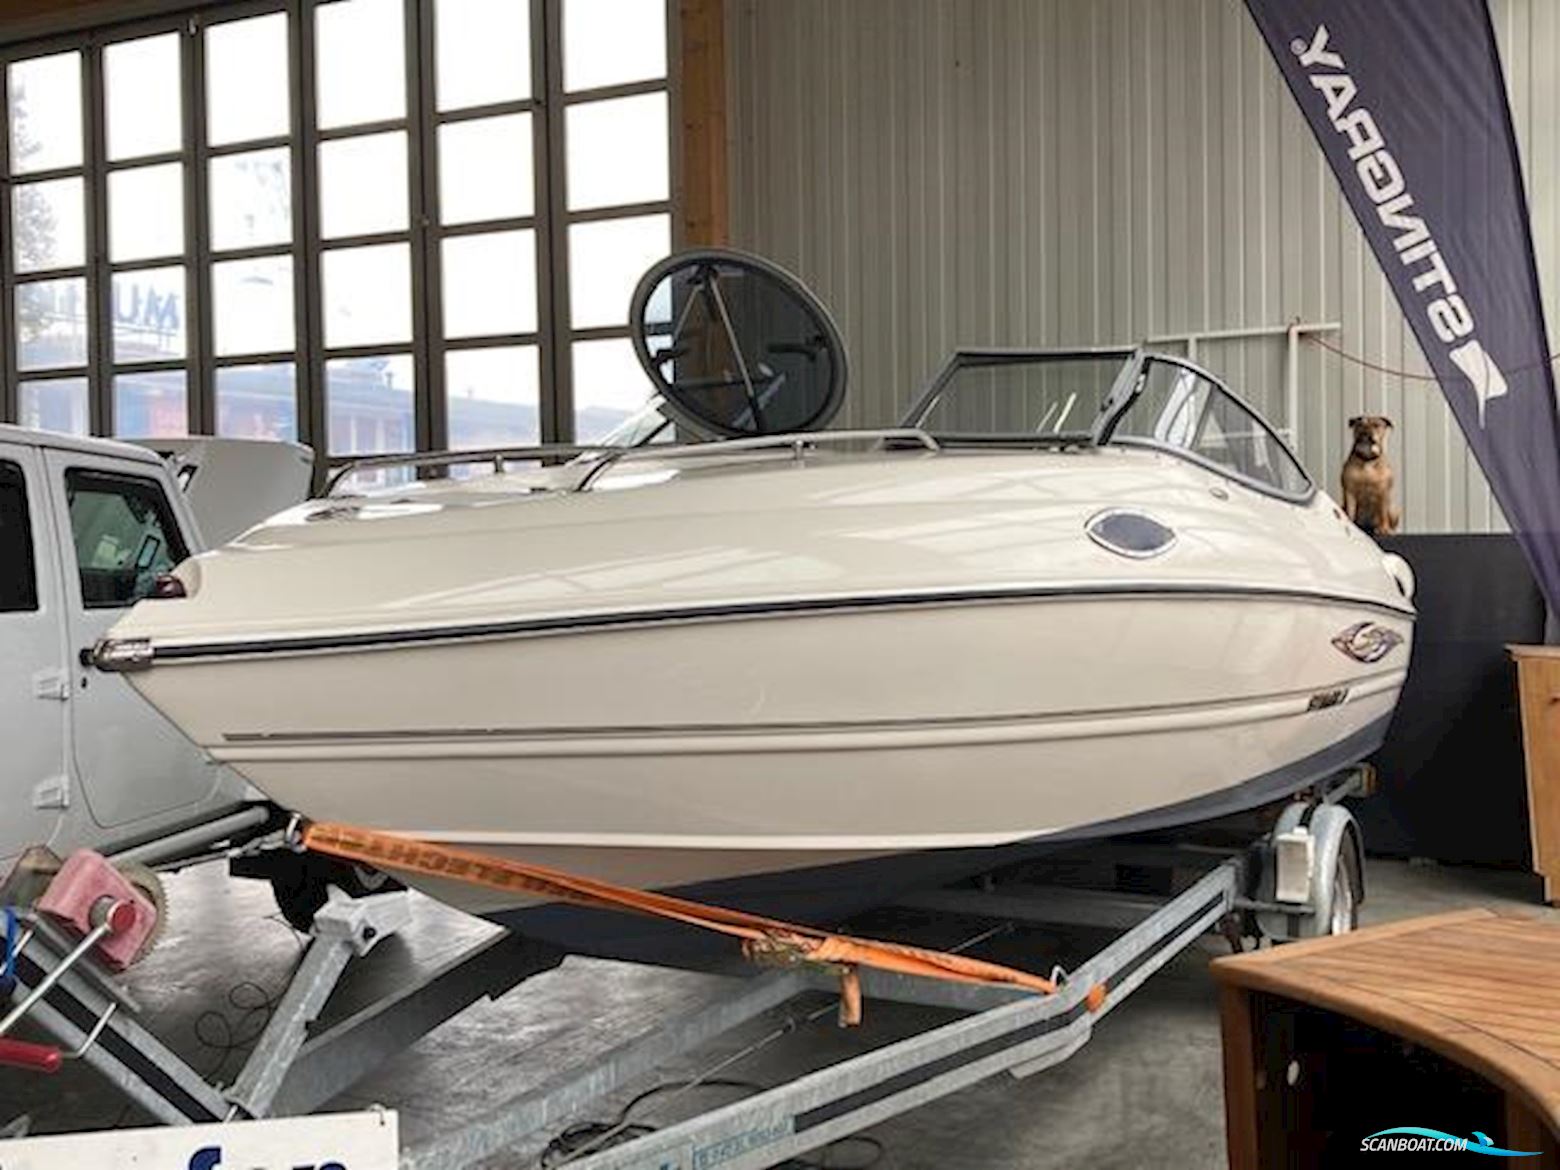 Stingray 195 CX Ähnl. Sea Ray, Four Winns, Bayliner, Monterey, Viper) Motor boat 2009, with Volvo Penta 3.0 Carb engine, Germany